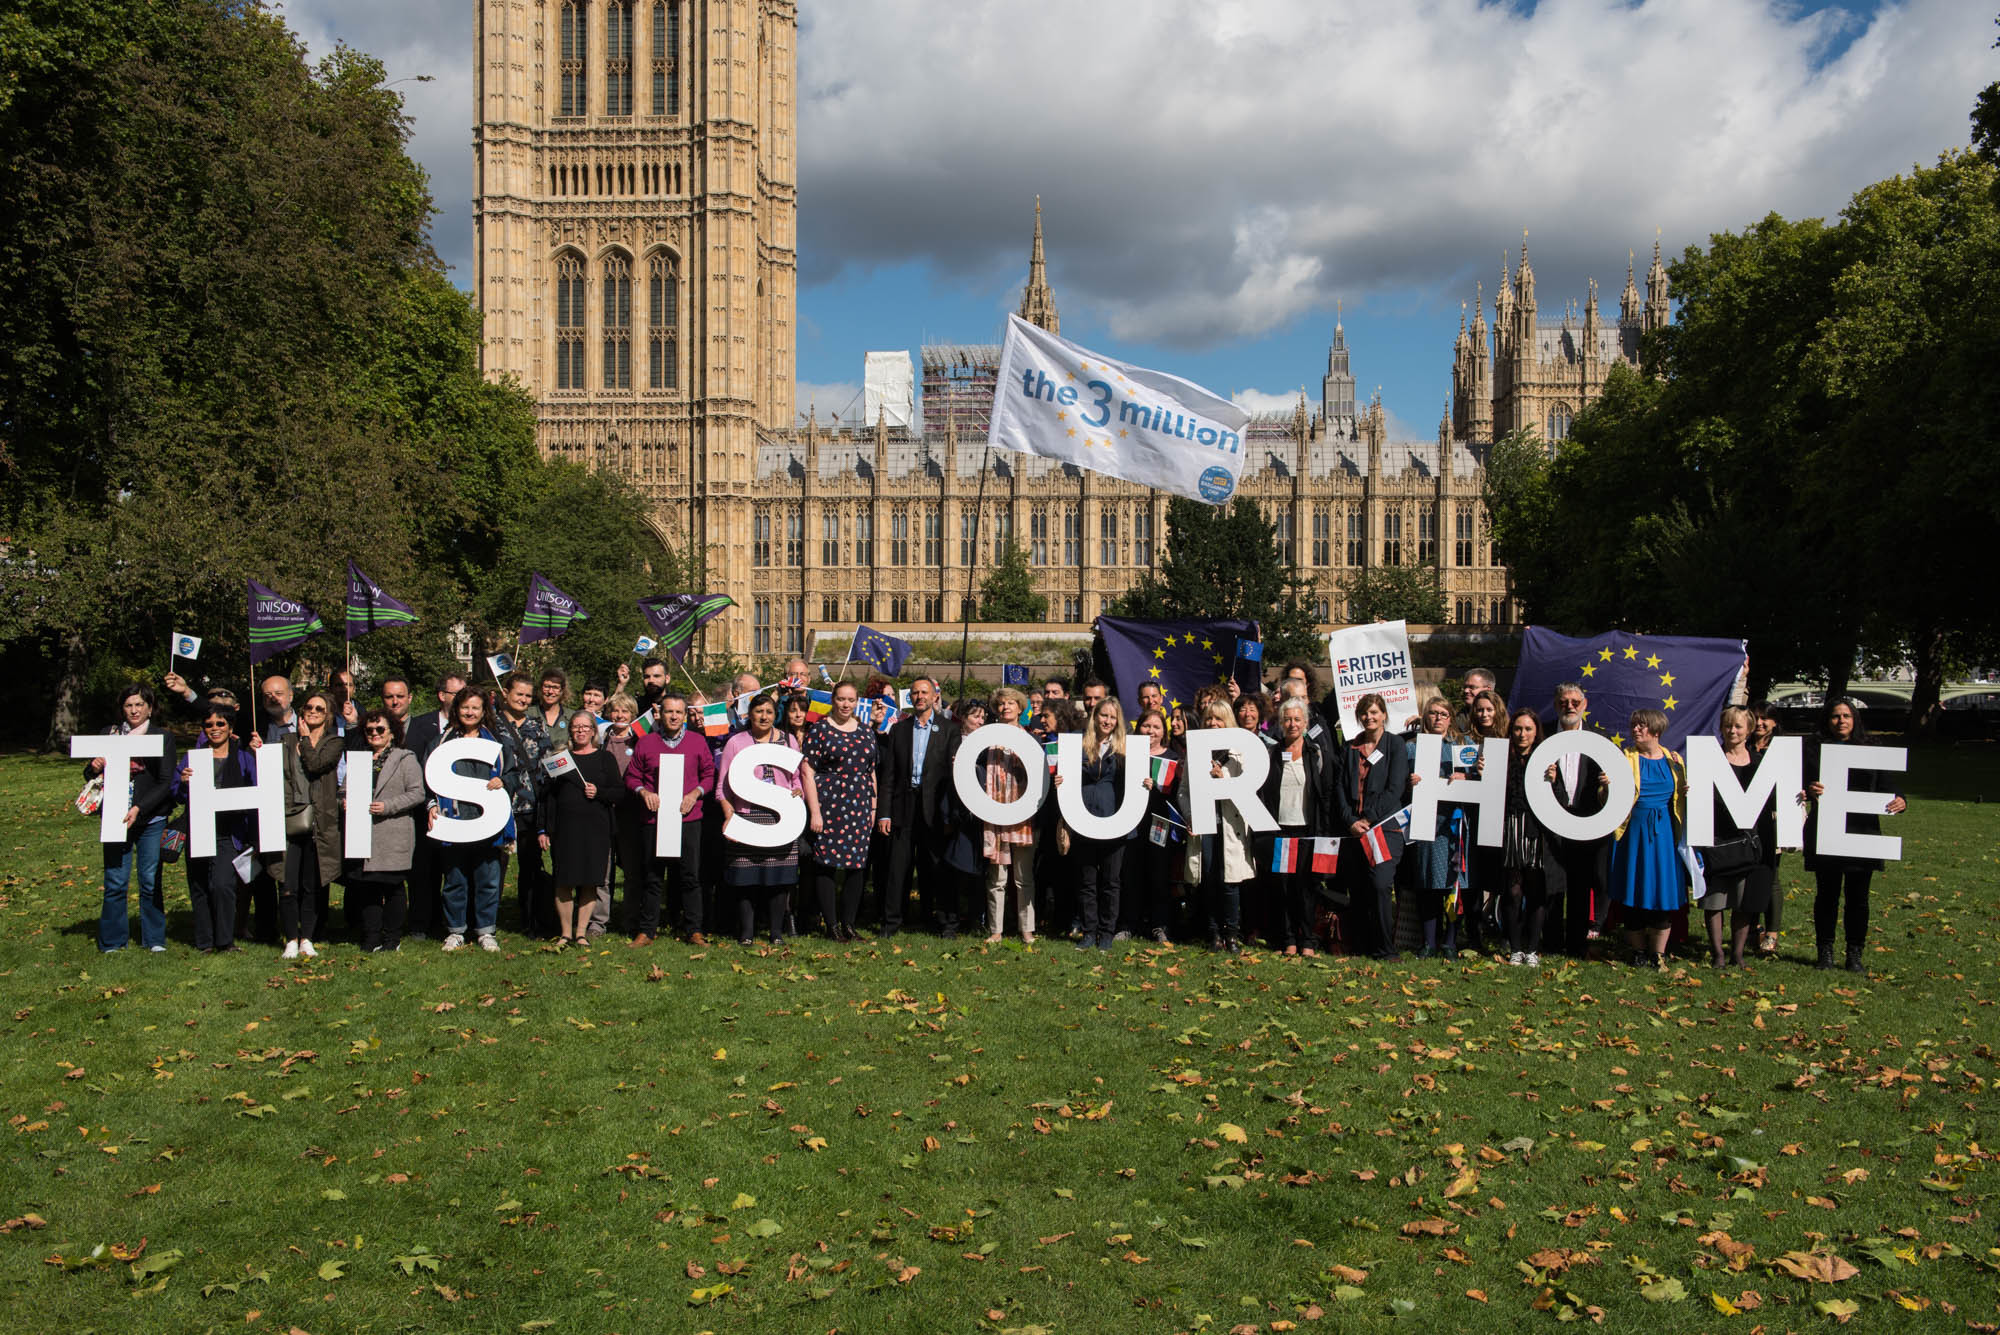 Victoria Tower Gardens, LONDON
EU citizens living and working in the UK hold up 4ft (1.2 metre) high letters spelling out ’This Is Our Home.’

Part of a mass lobby today of the government to protect the rights of these citizens post-Brexit

The lobby has been organised by UNISON, the3million and British in Europe.

Notes for editors: 
– The3million is a campaign group working to preserve the rights of EU citizens in the UK.
– UNISON is one of the UK’s largest unions representing 1.3 million people working in public services.
– British in Europe is the largest coalition group of British citizens living and working in Europe.